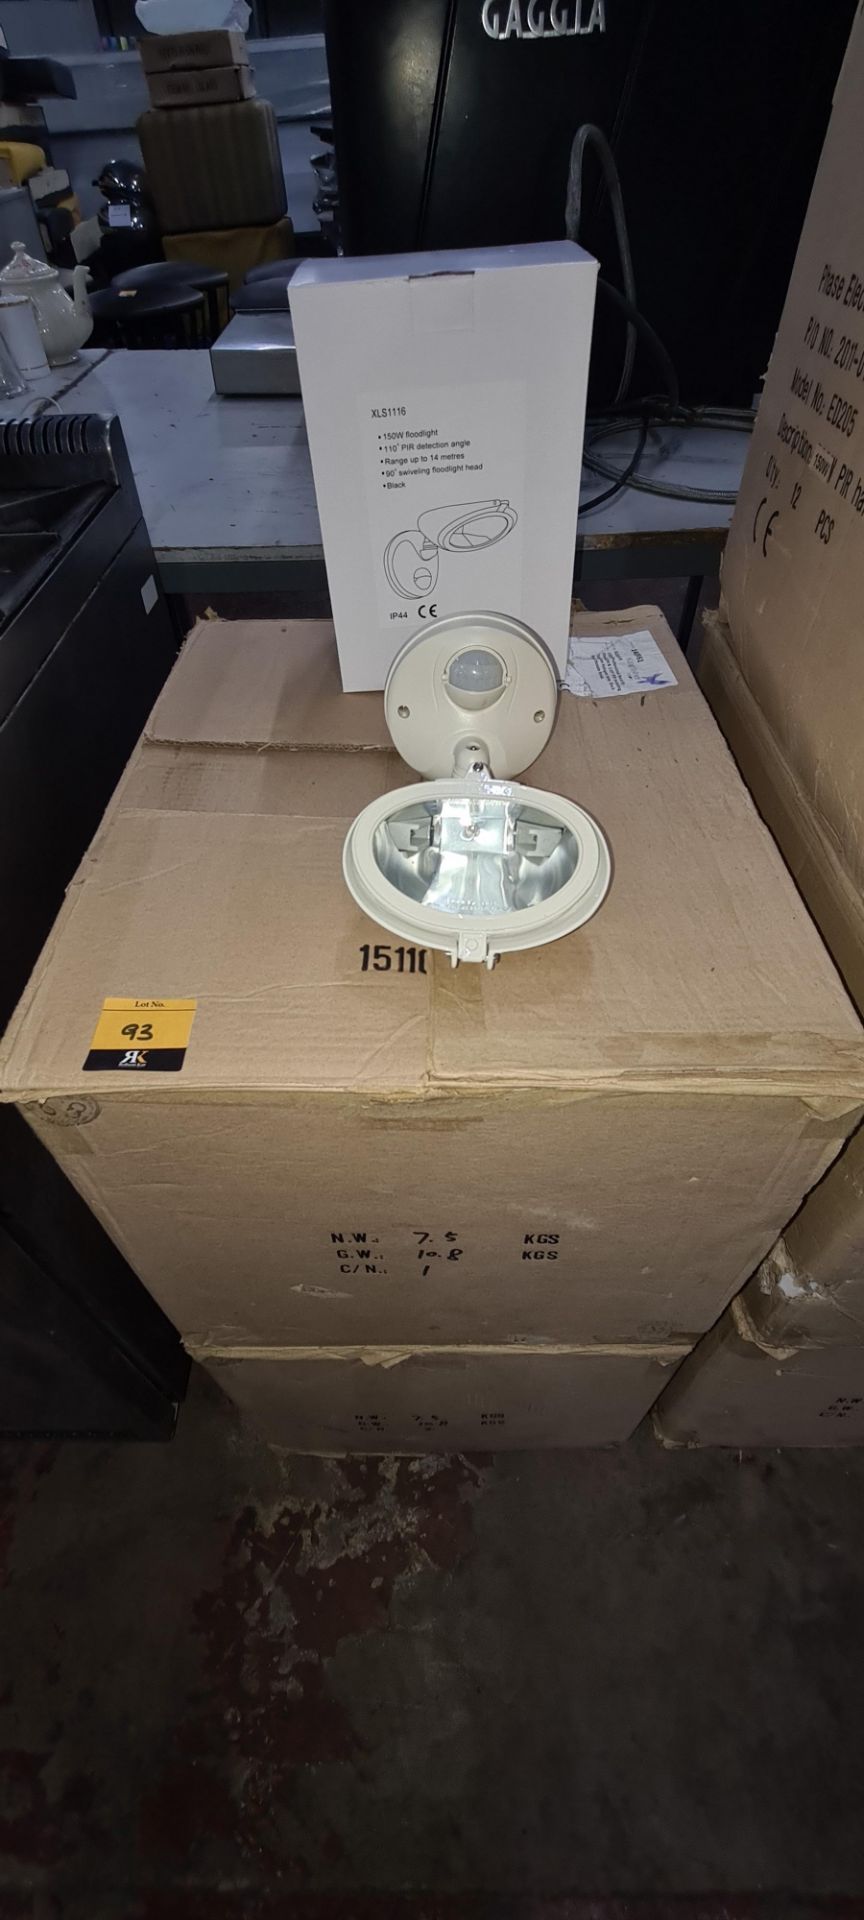 24 off 150W PIR detection floodlights - 2 large cartons - Image 4 of 4